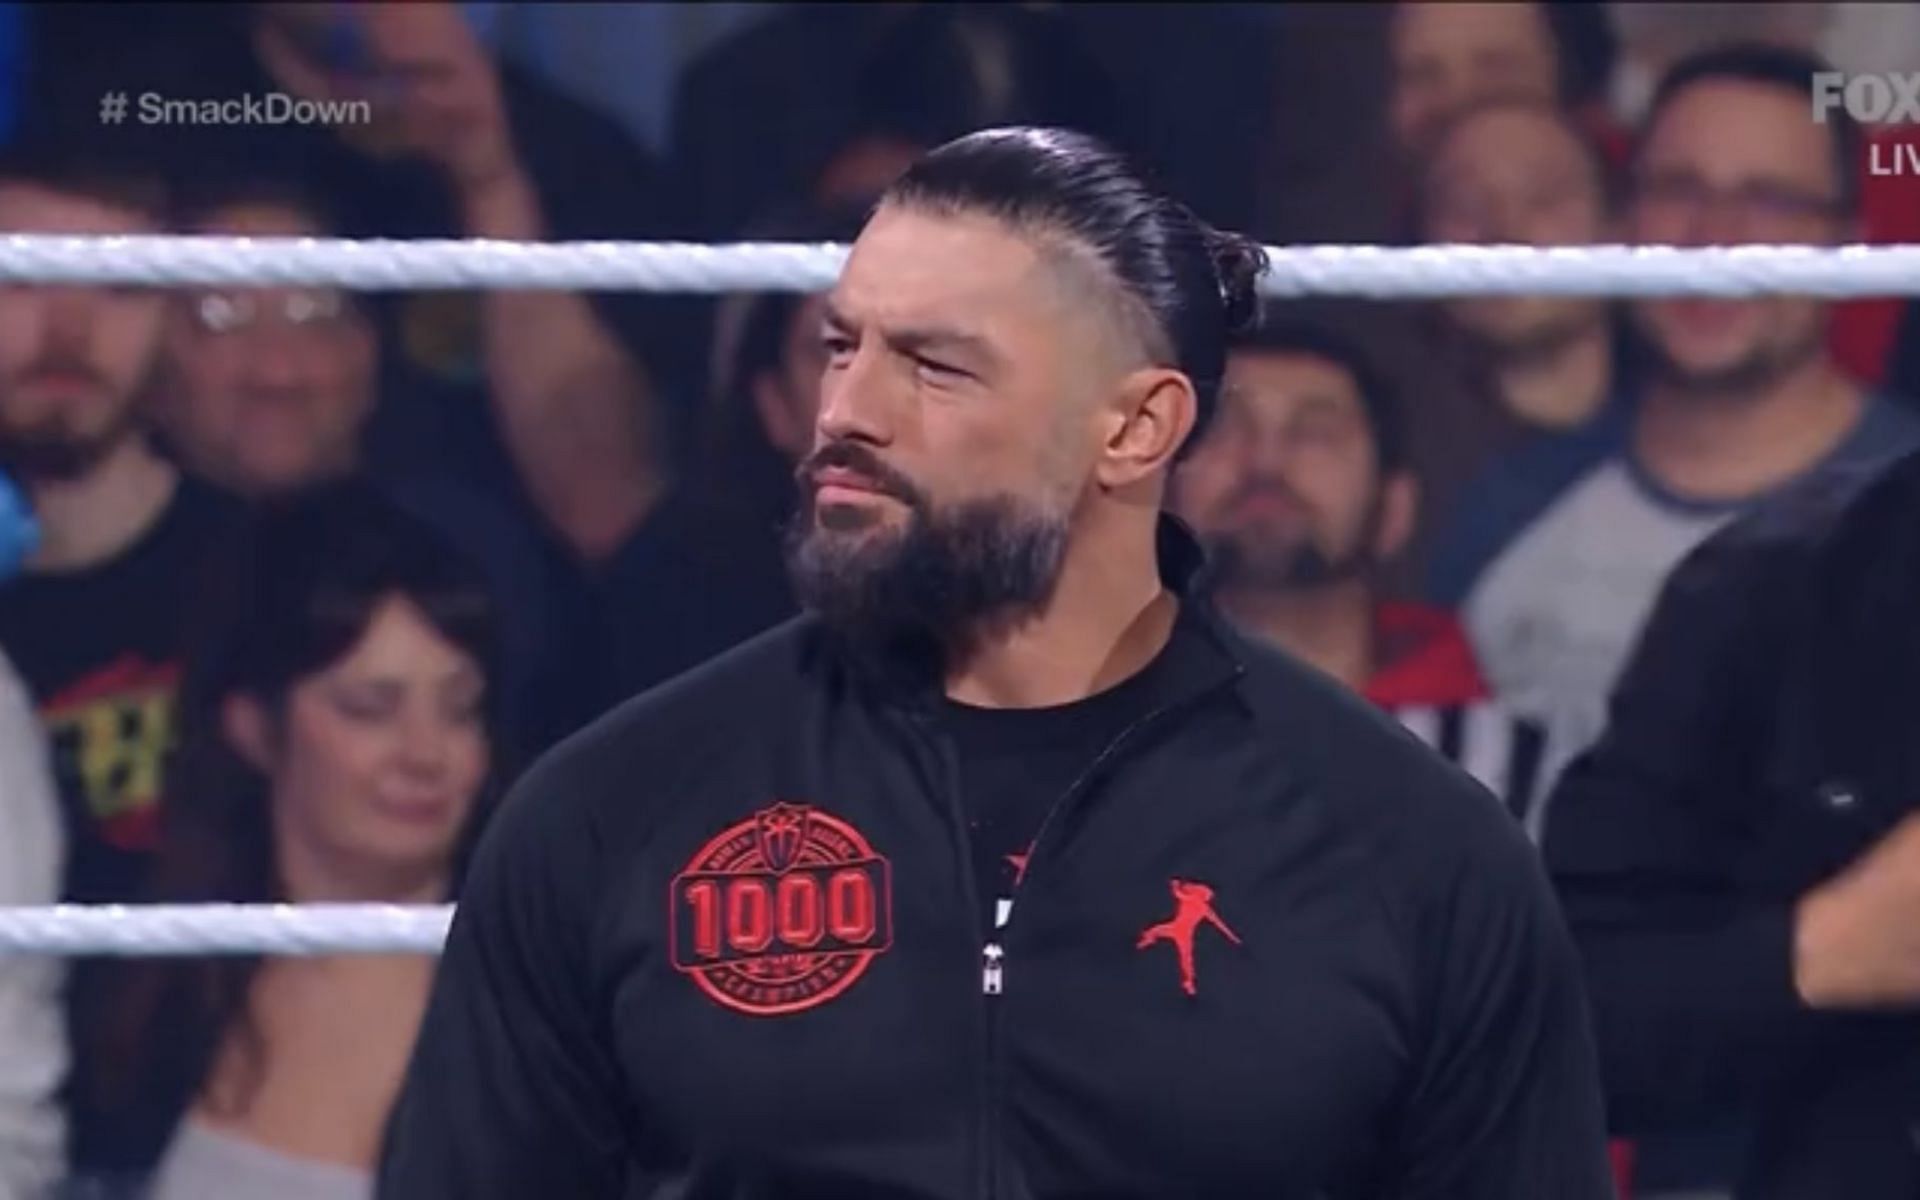 Roman Reigns says he knows who the next Tribal Chief will be to succeed him